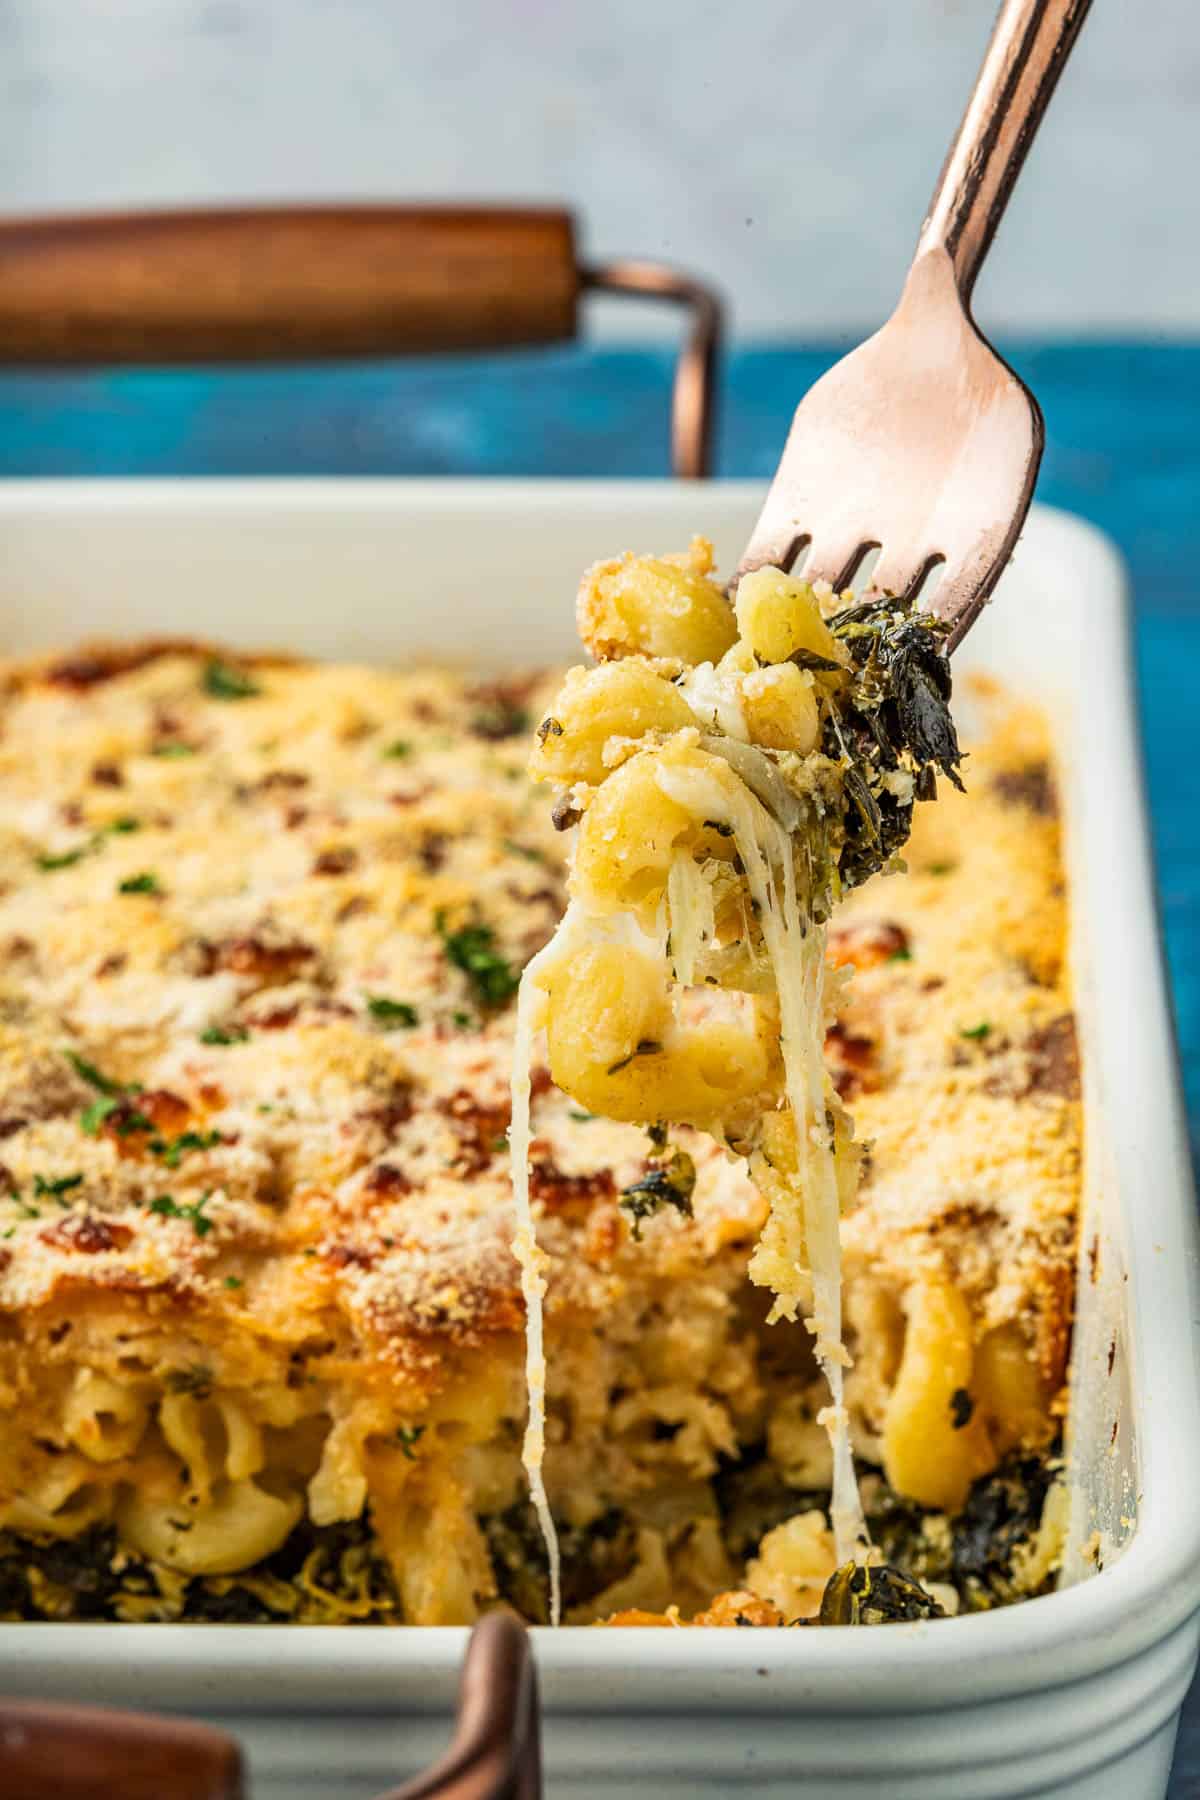 Fork pulling up a bite of Spanakopita Mac and cheese, showing the crispy breadcrumbs and melted cheese pulling from the casserole.